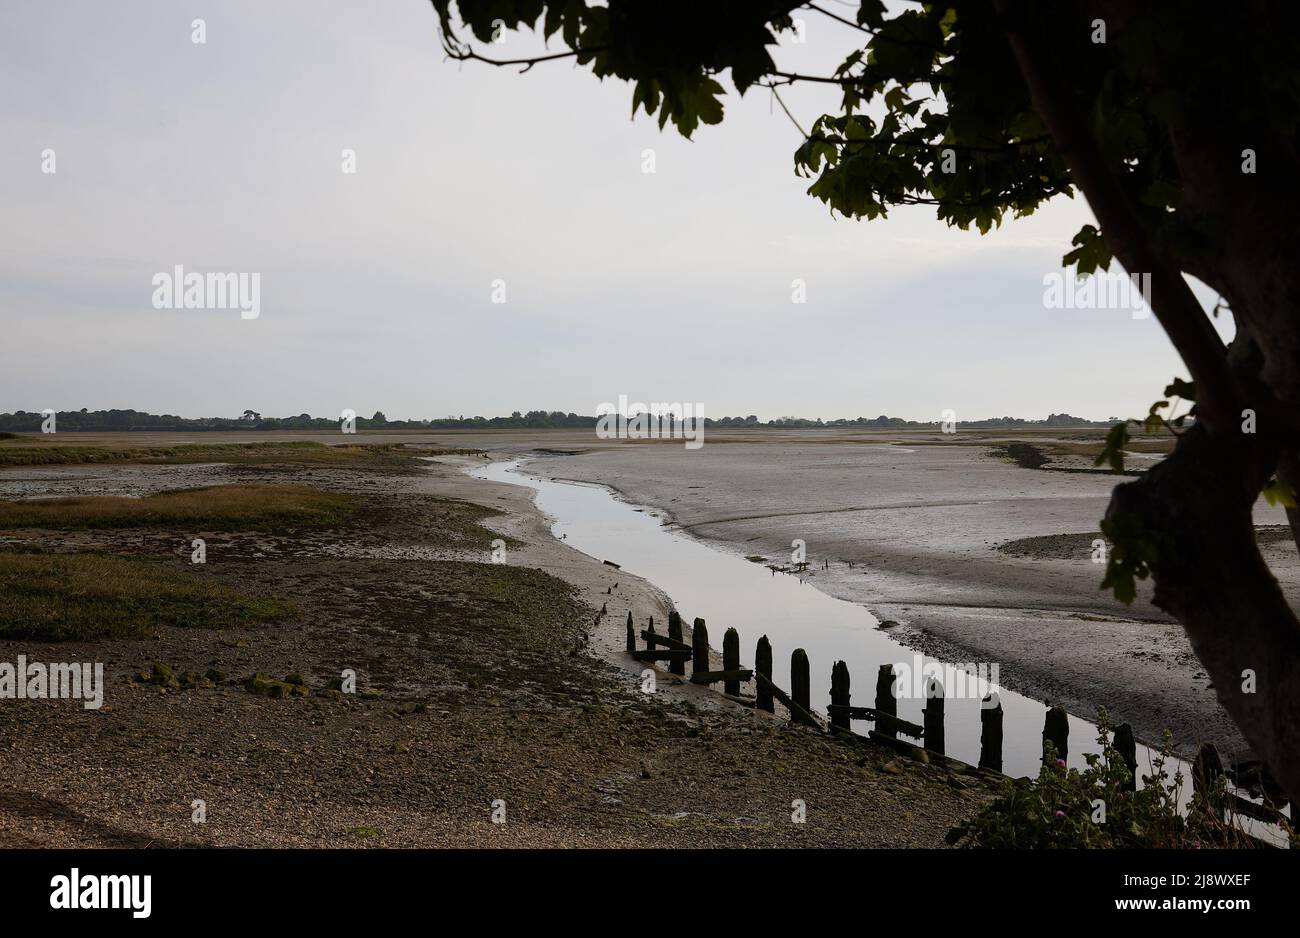 General view of low tide in Pagham harbour, seen with mudflats and one small stream. Stock Photo